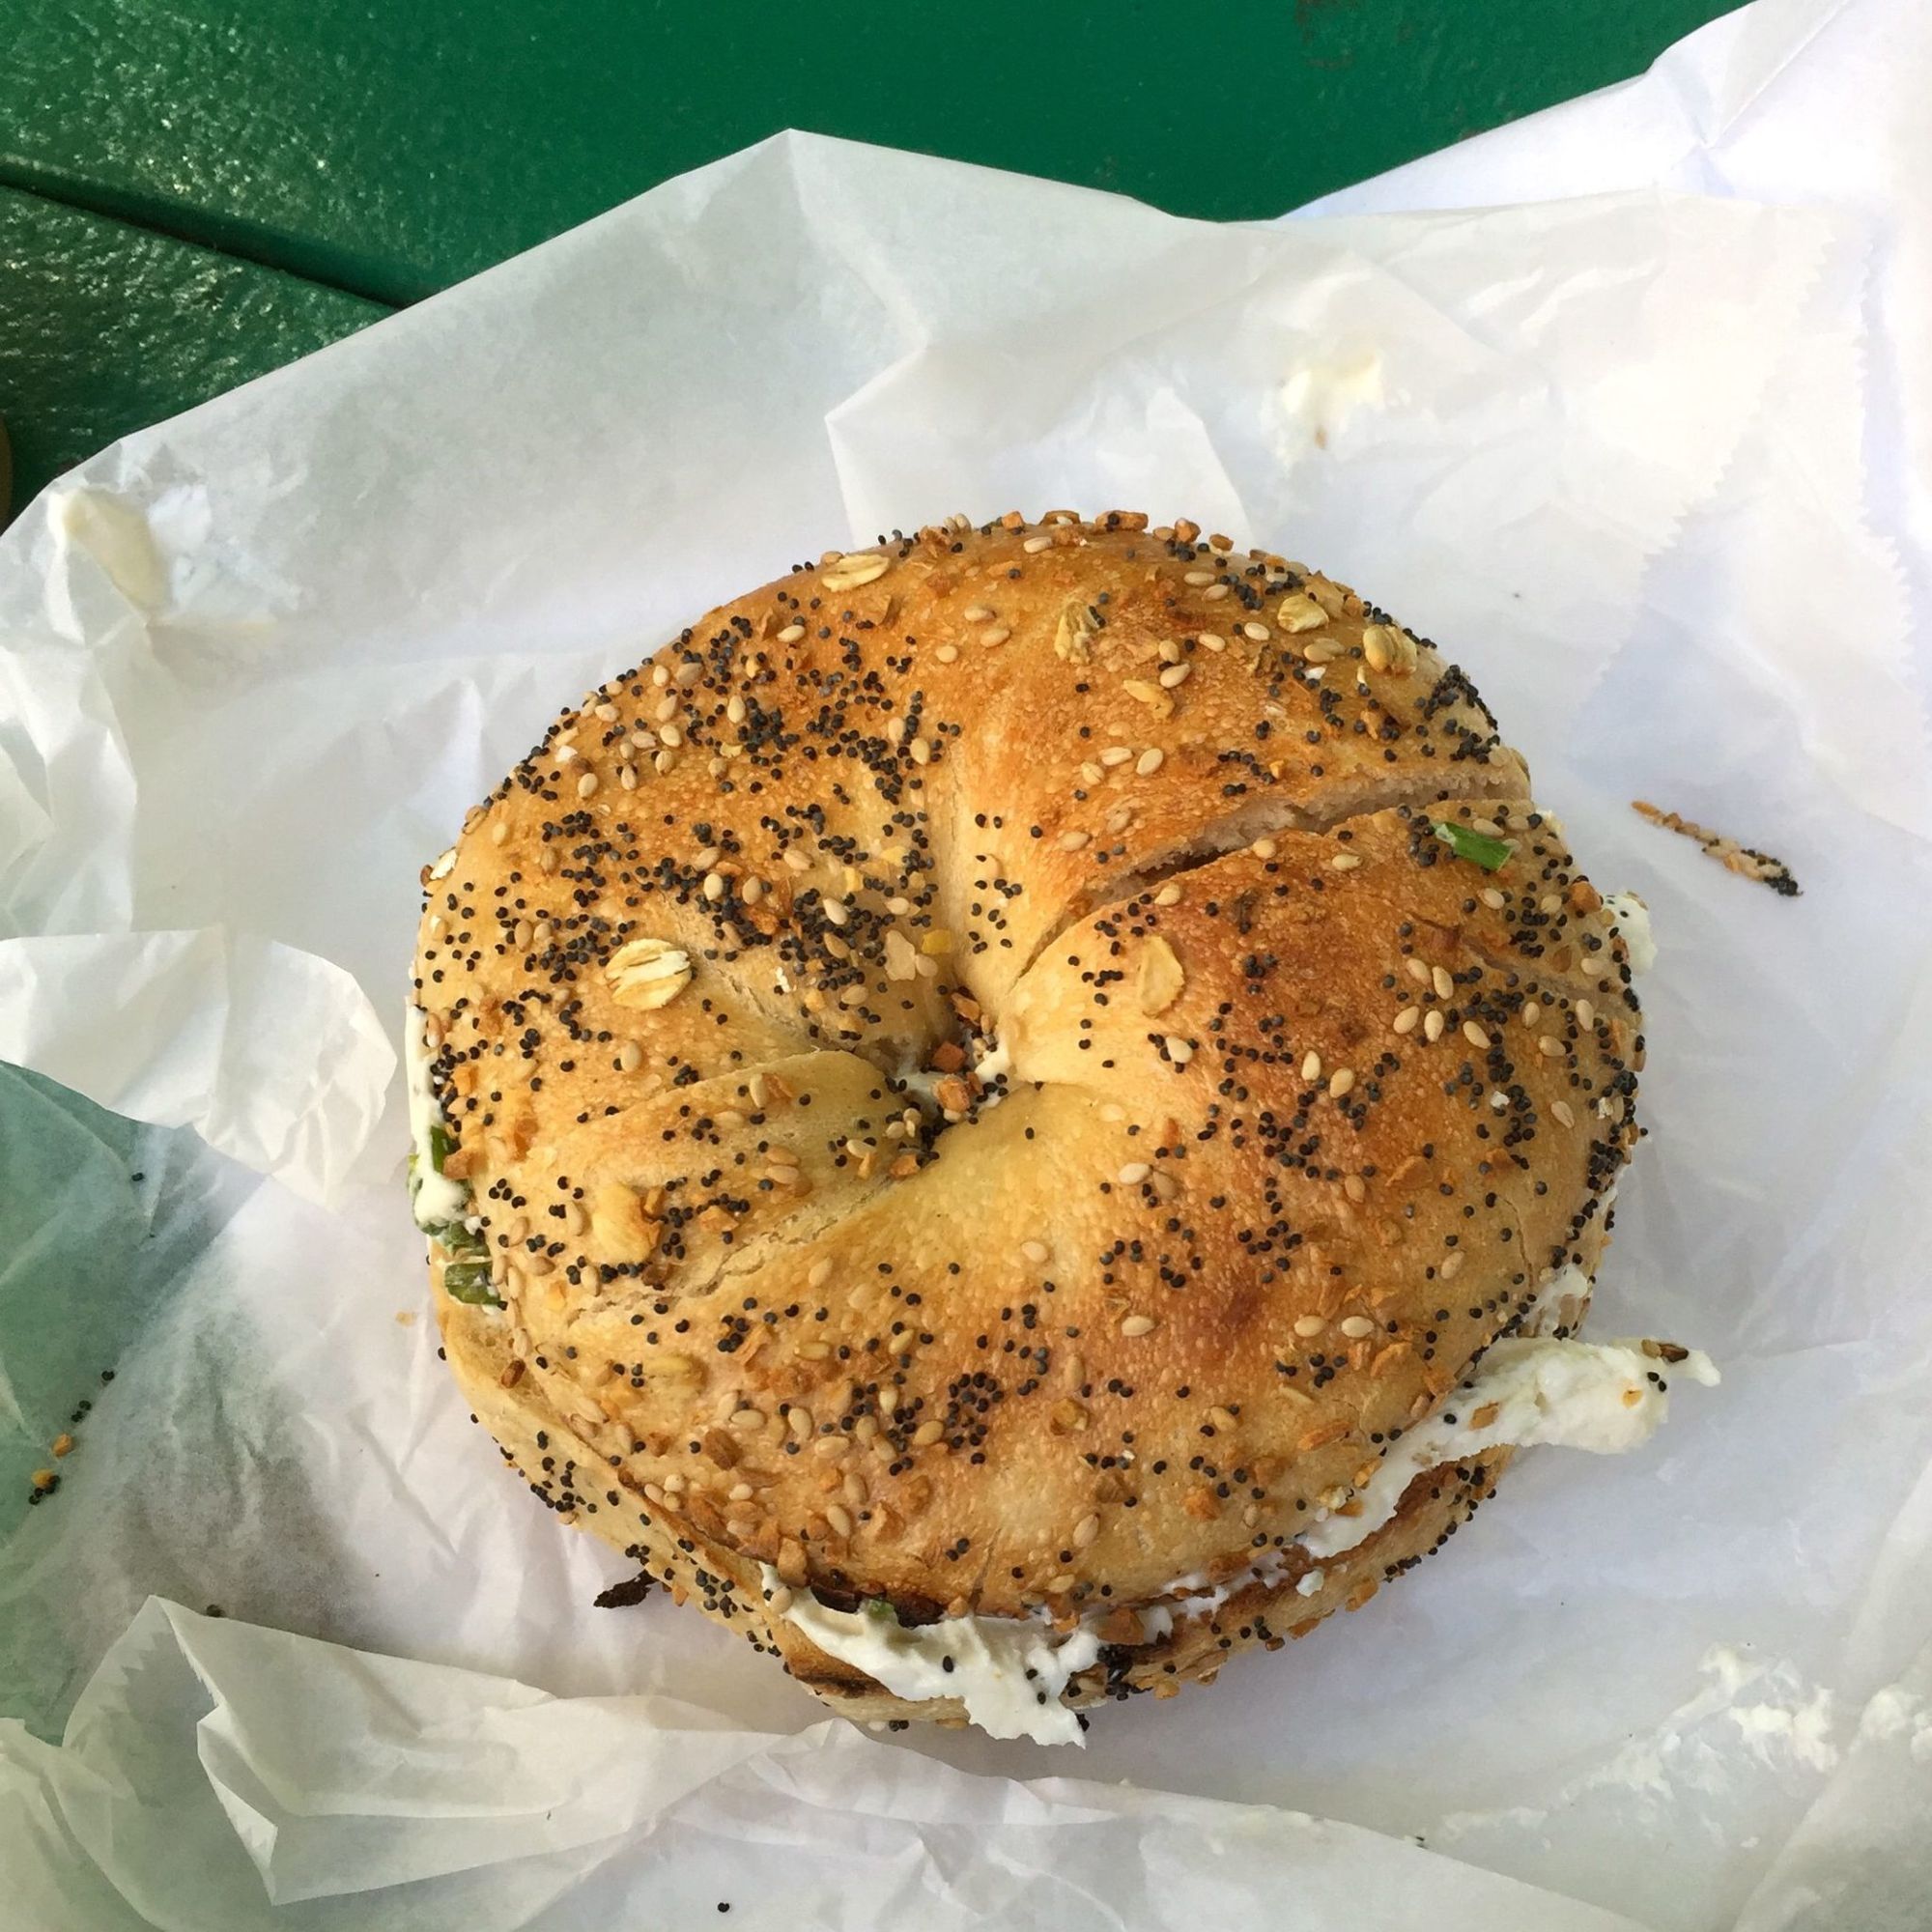 Eating In The Backyard Escape Of Bagel Pub